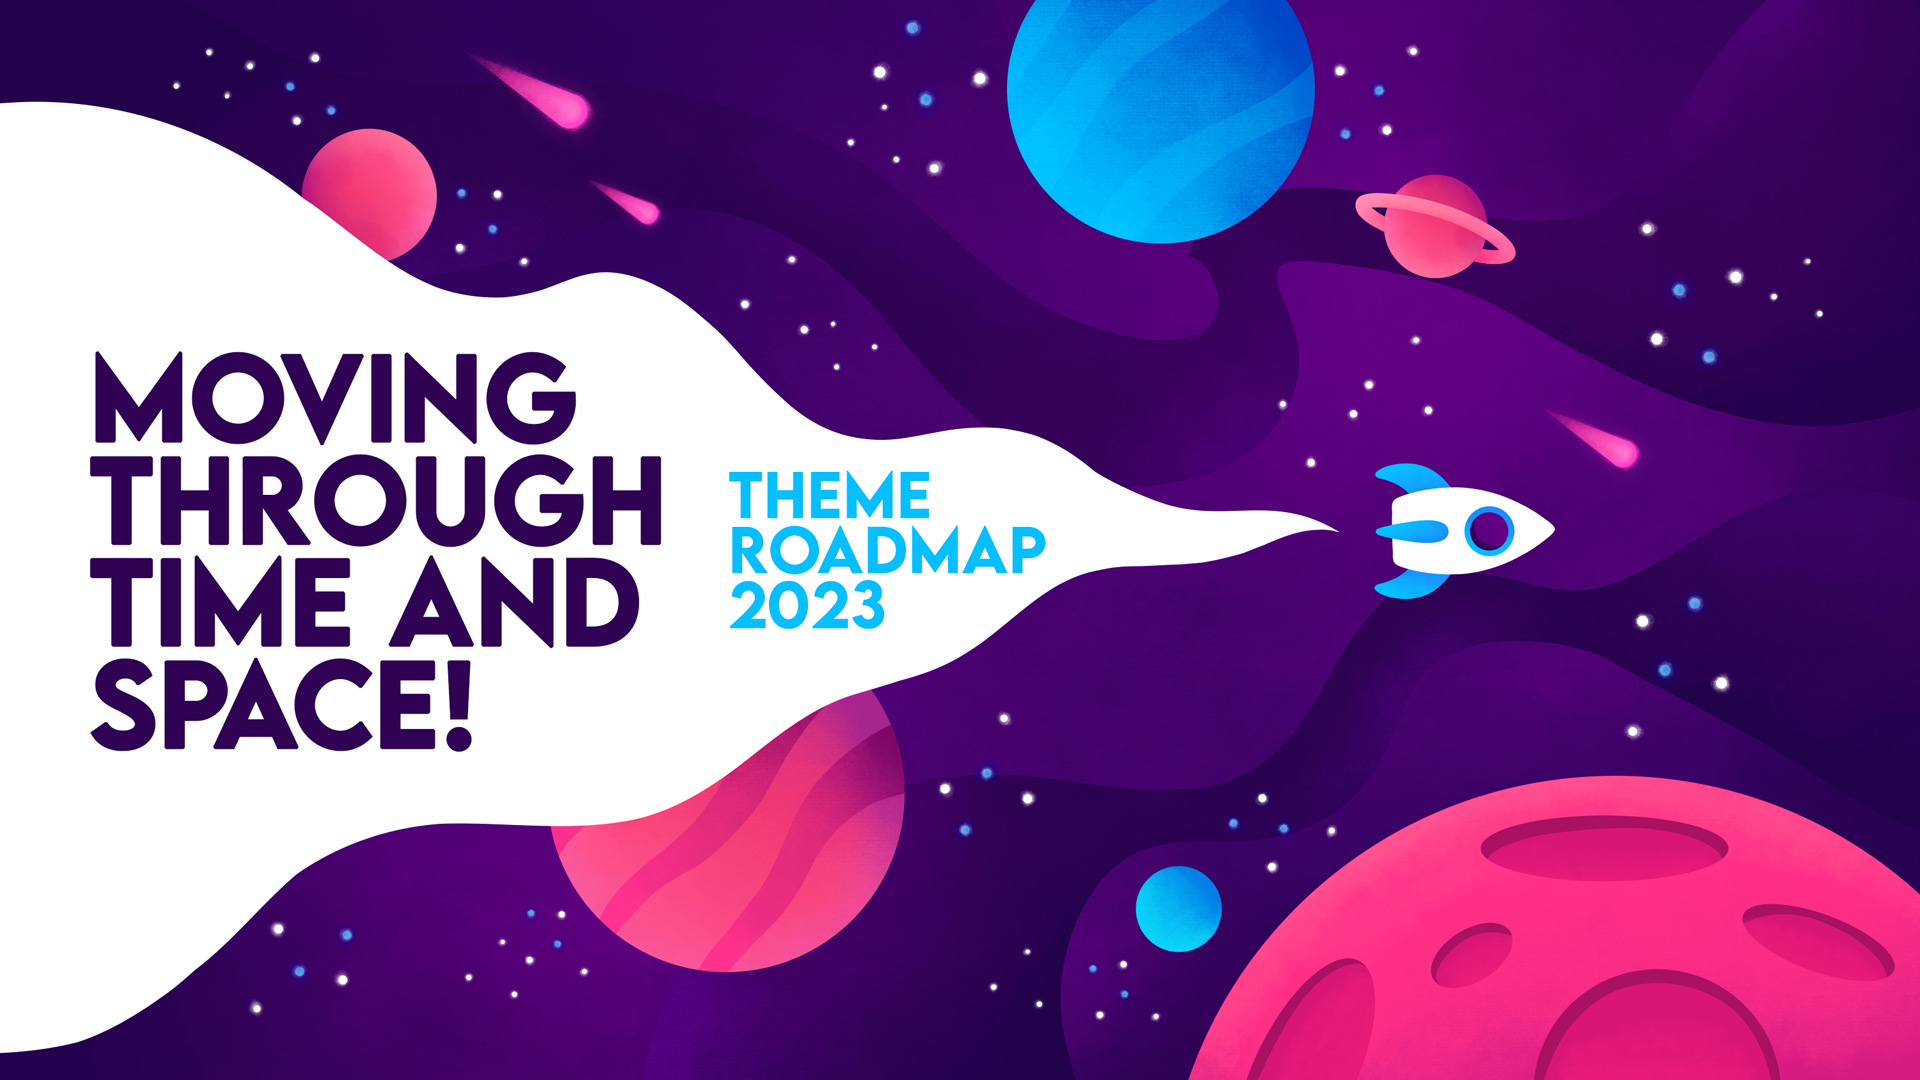 Moving through time and space! Theme Roadmap 2023